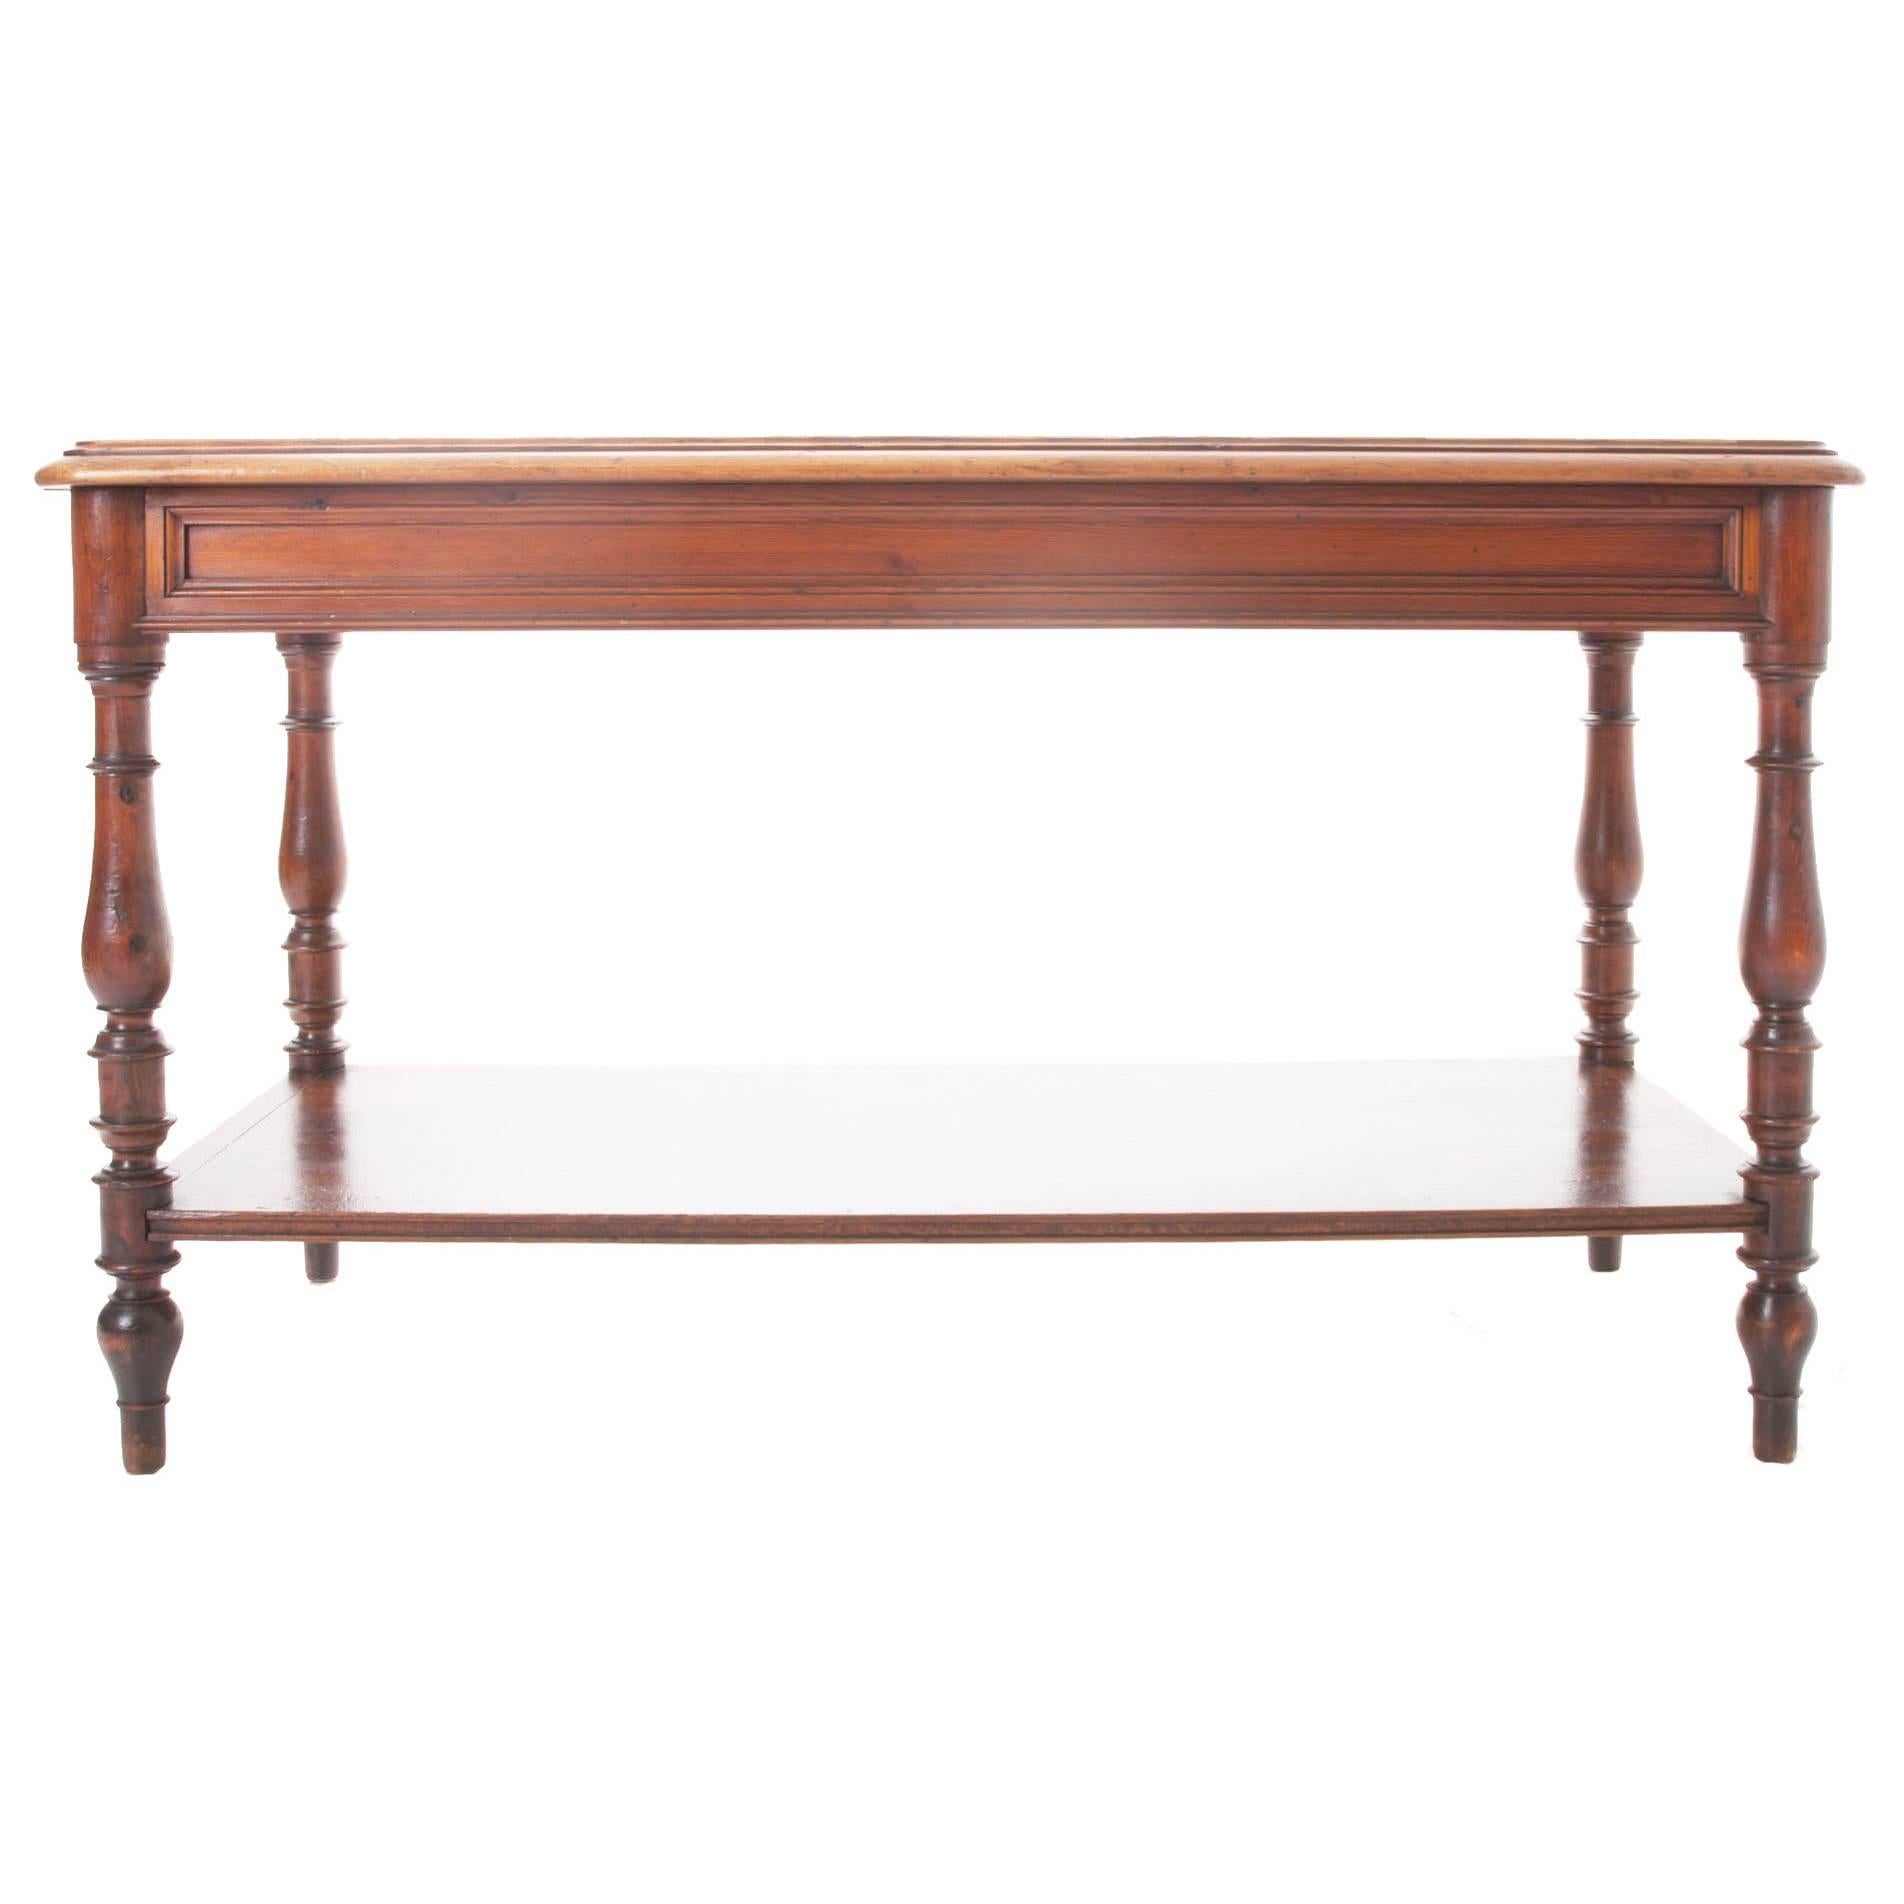 French 19th Century Pine Draper's Table From Brittany